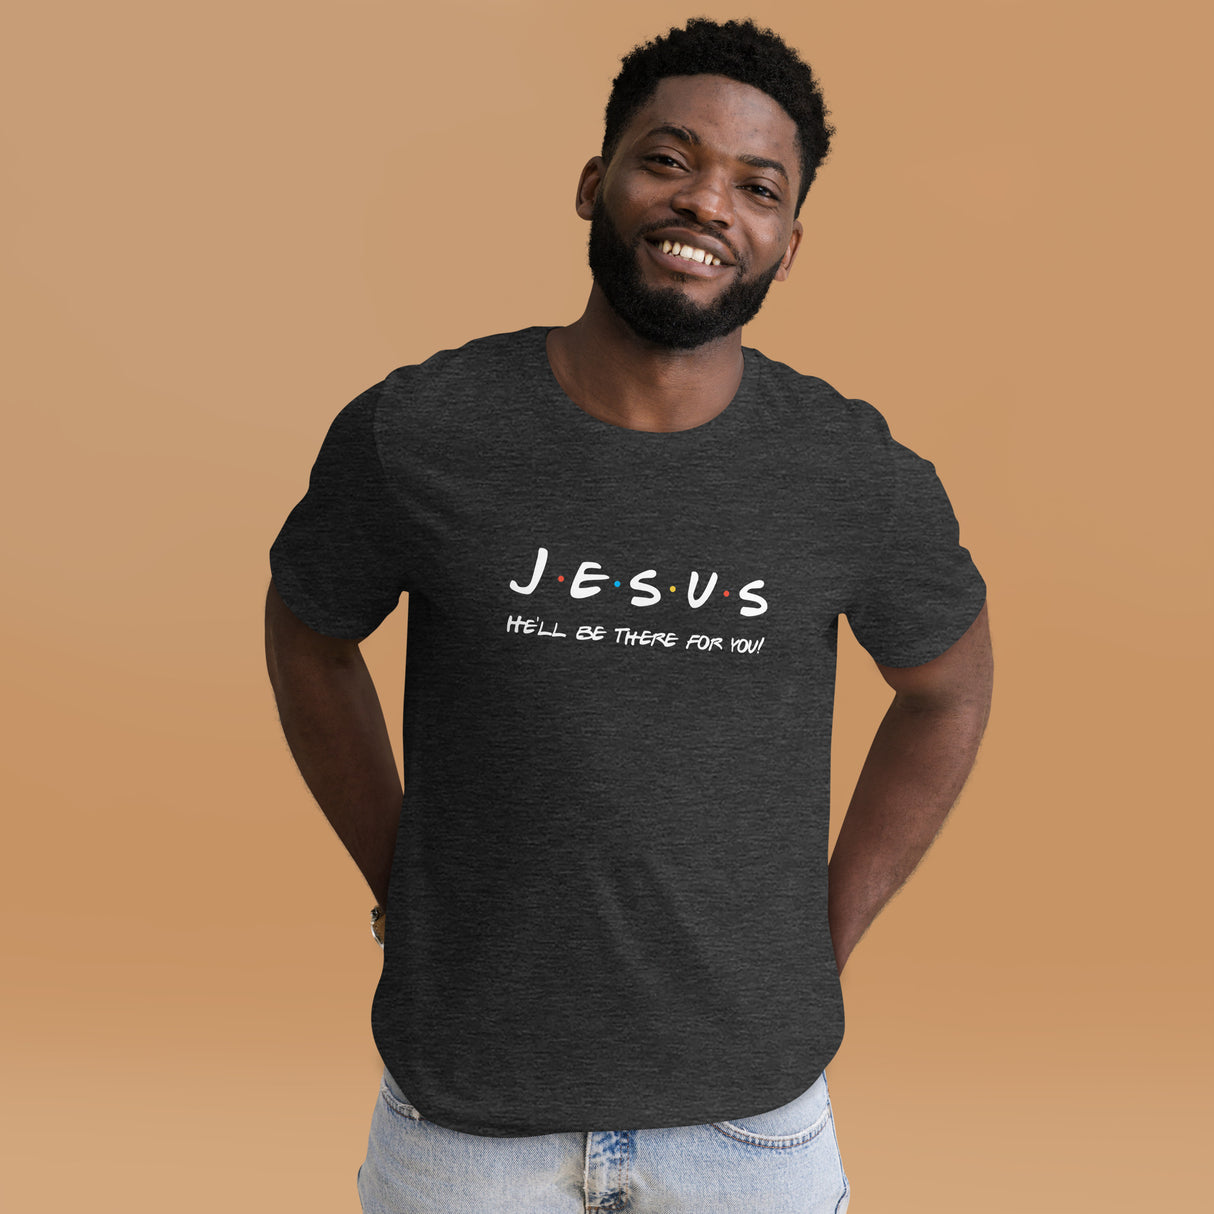 Jesus Will Be There For You Men's Shirt